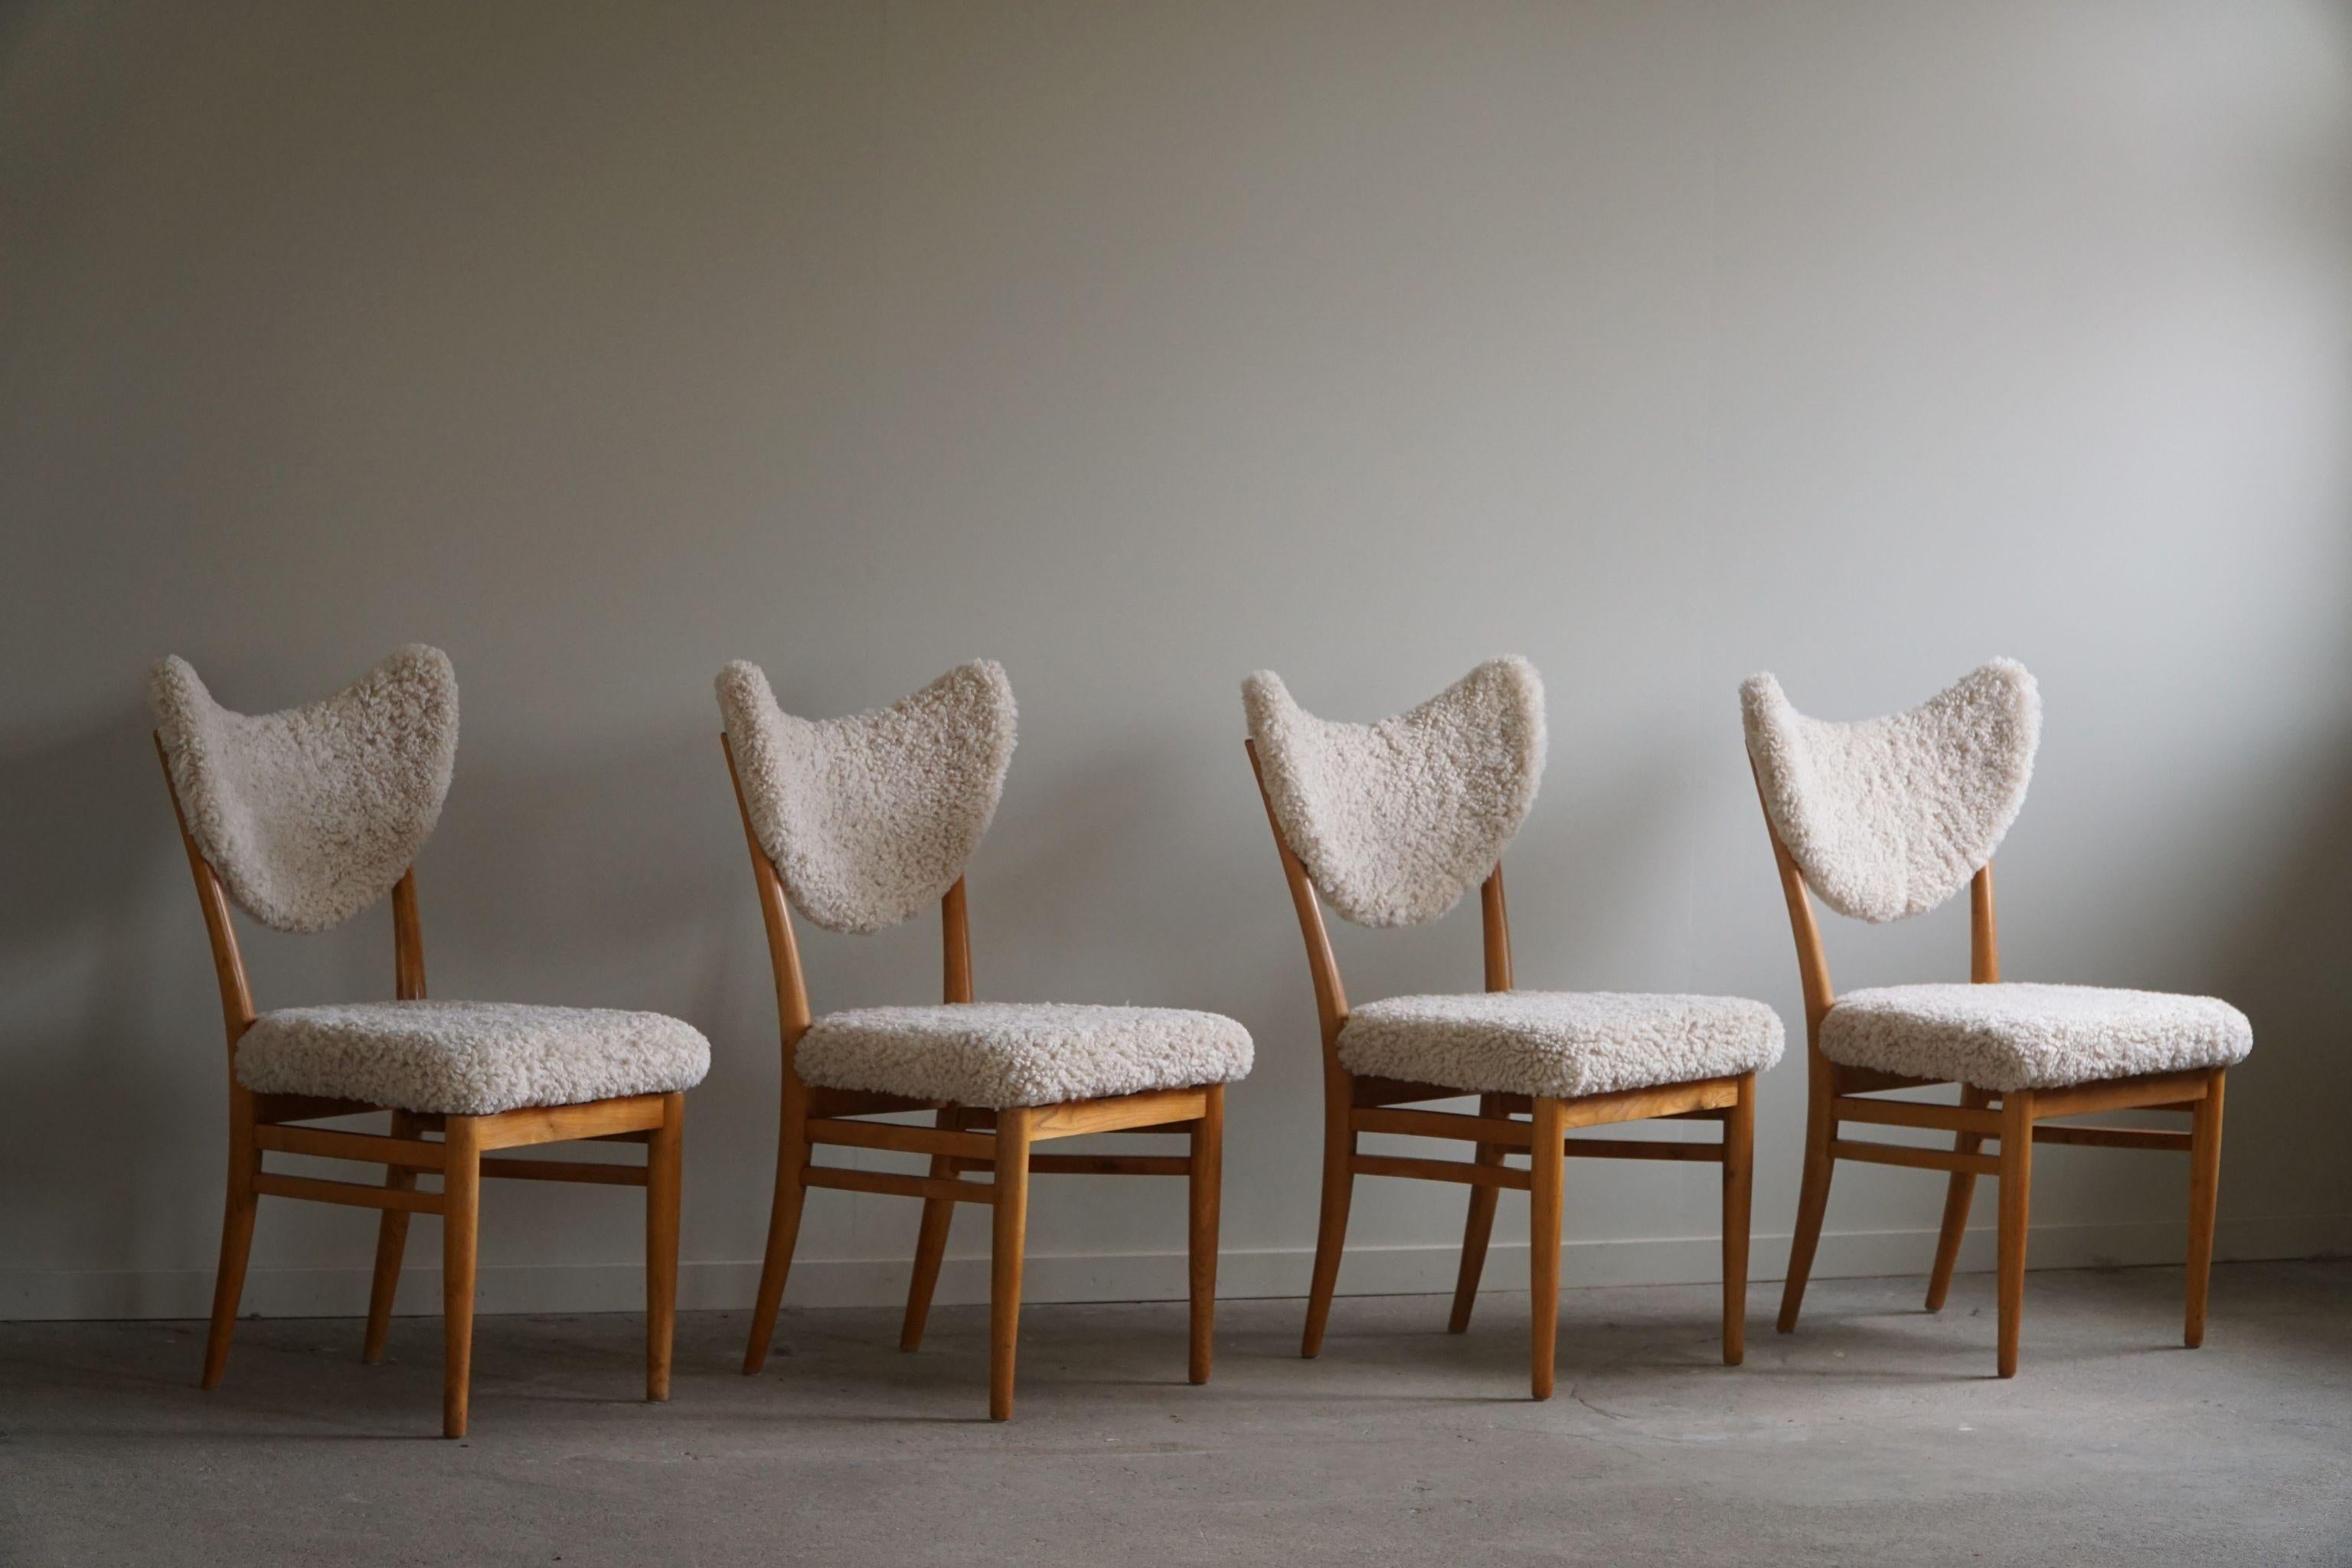 Hvidt & Mølgaard, Set of 4 Chairs in Ash, Reupholstered in Lambswool, 1950s For Sale 11